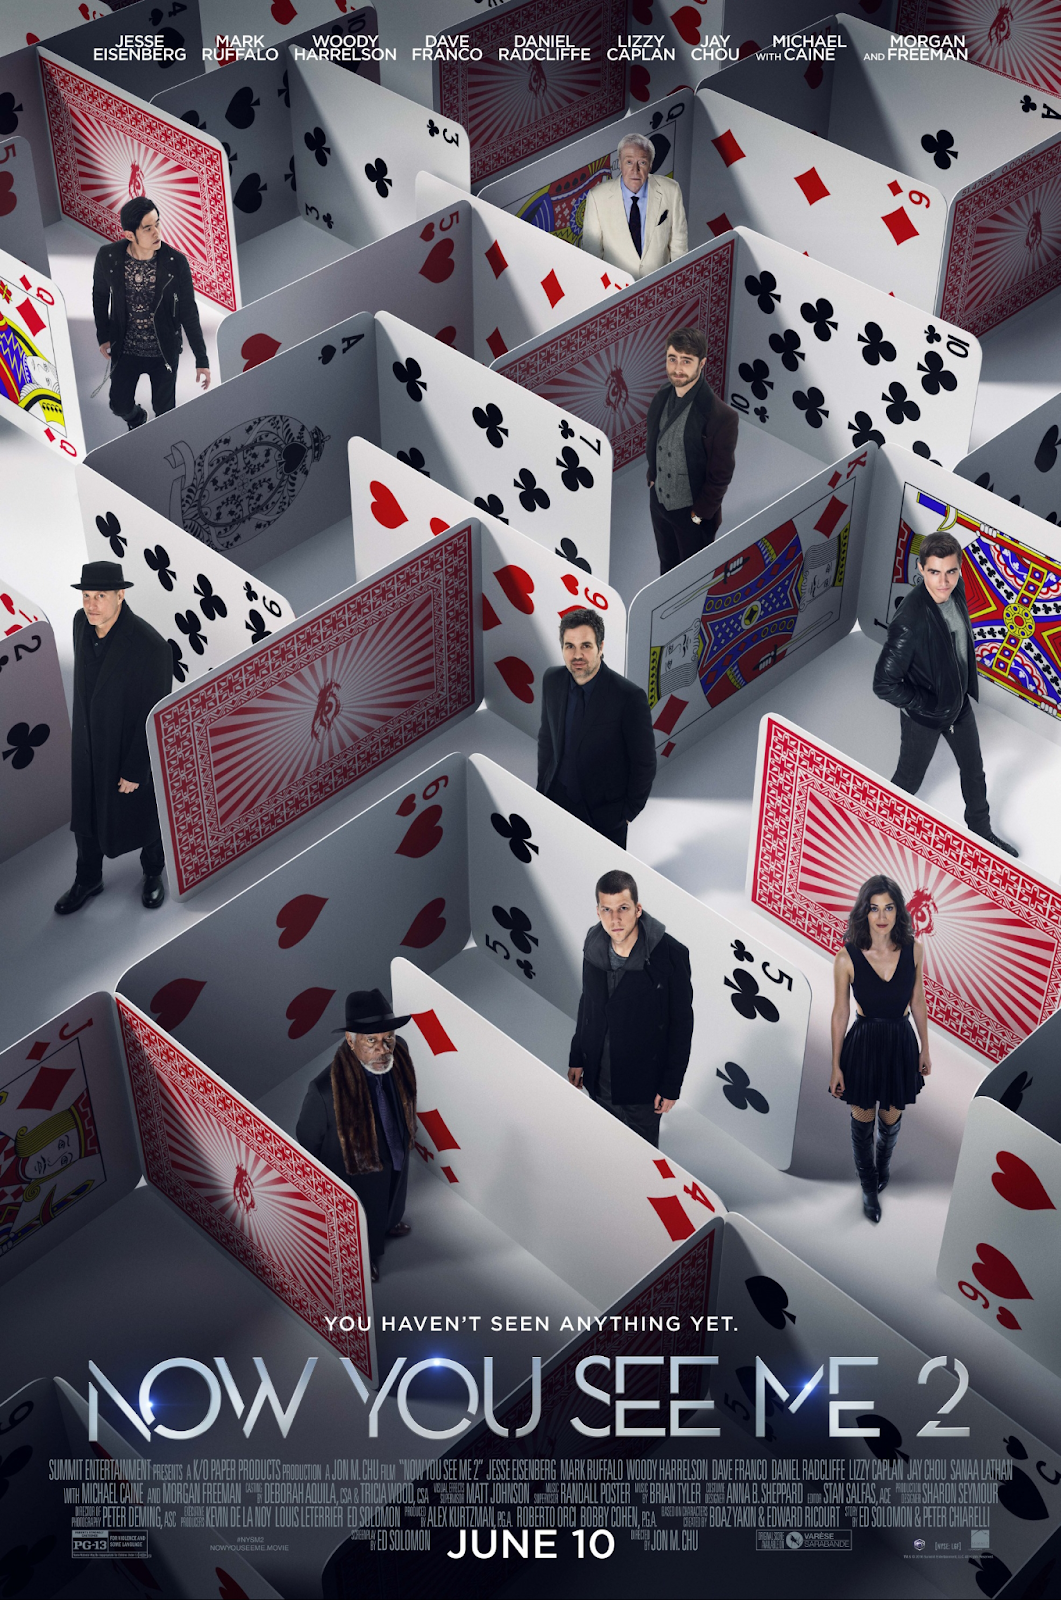 Now You See Me 2- Heist movies